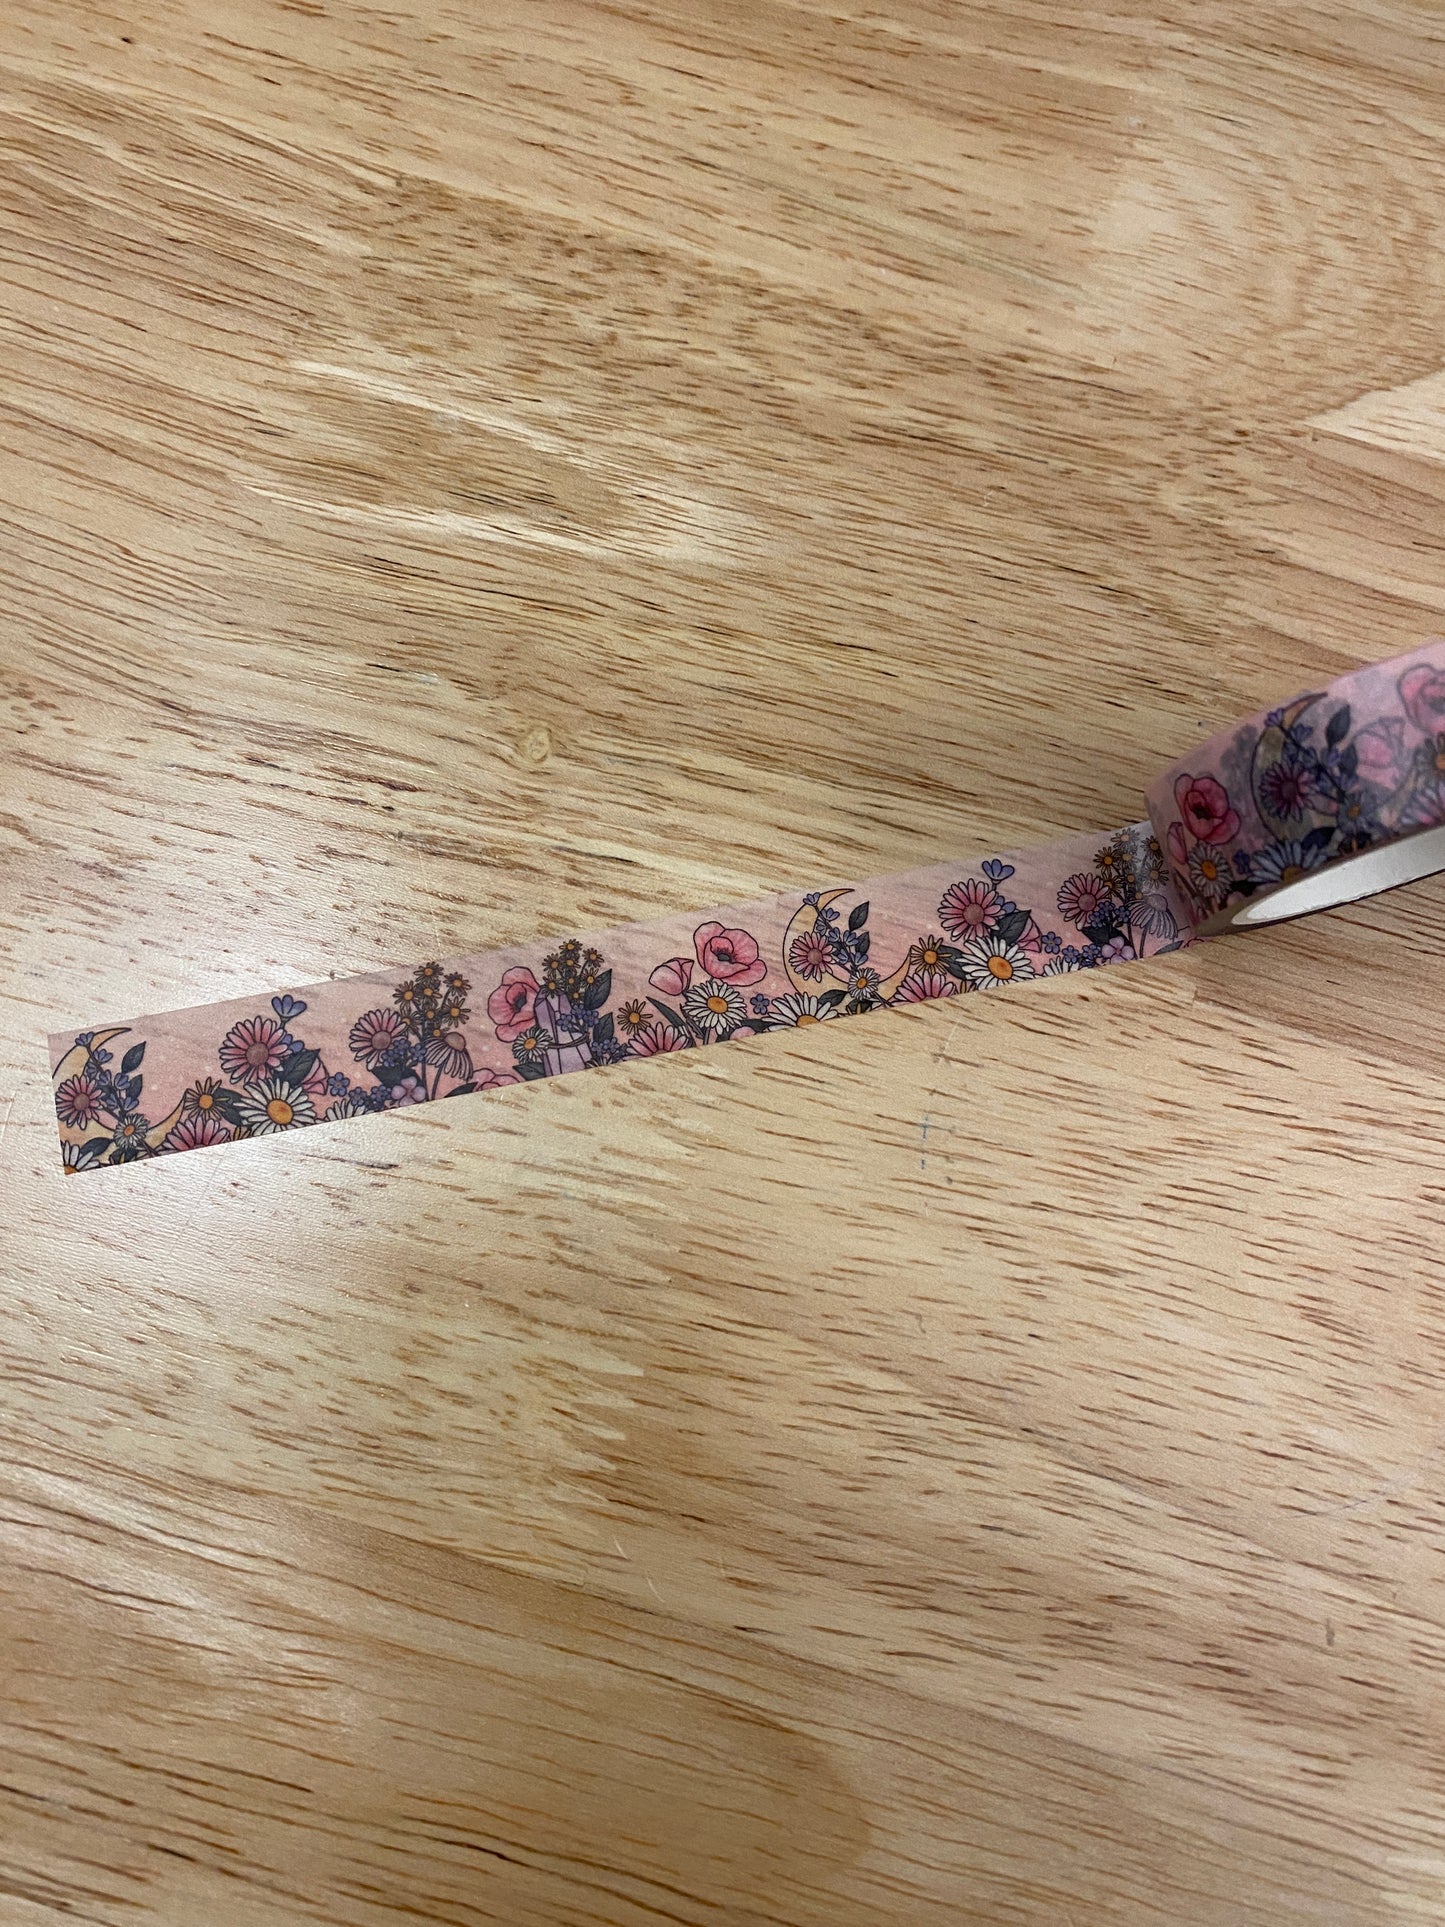 Big Roll of Pink Floral with Moon Washi Tape, Flower Washi Tape roll, Adhesive Masking Tapes, Pretty Flower Washi tape, Moon Flowers tape